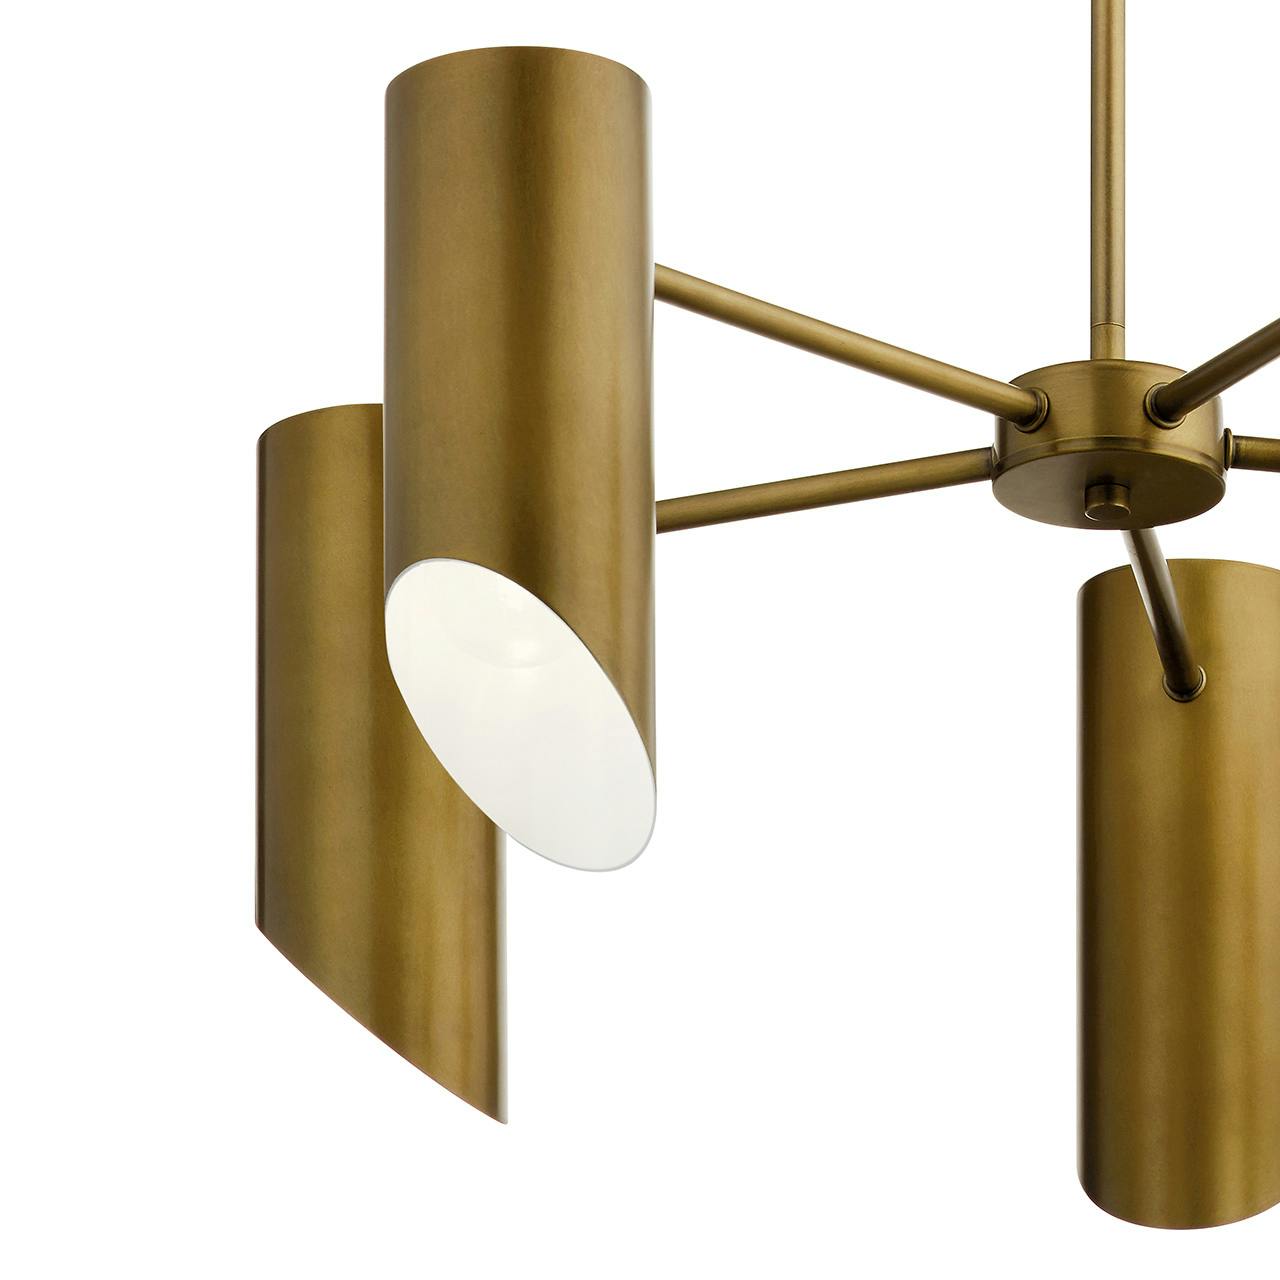 Close up view of the Trentino 5 Light Chandelier Natural Brass on a white background